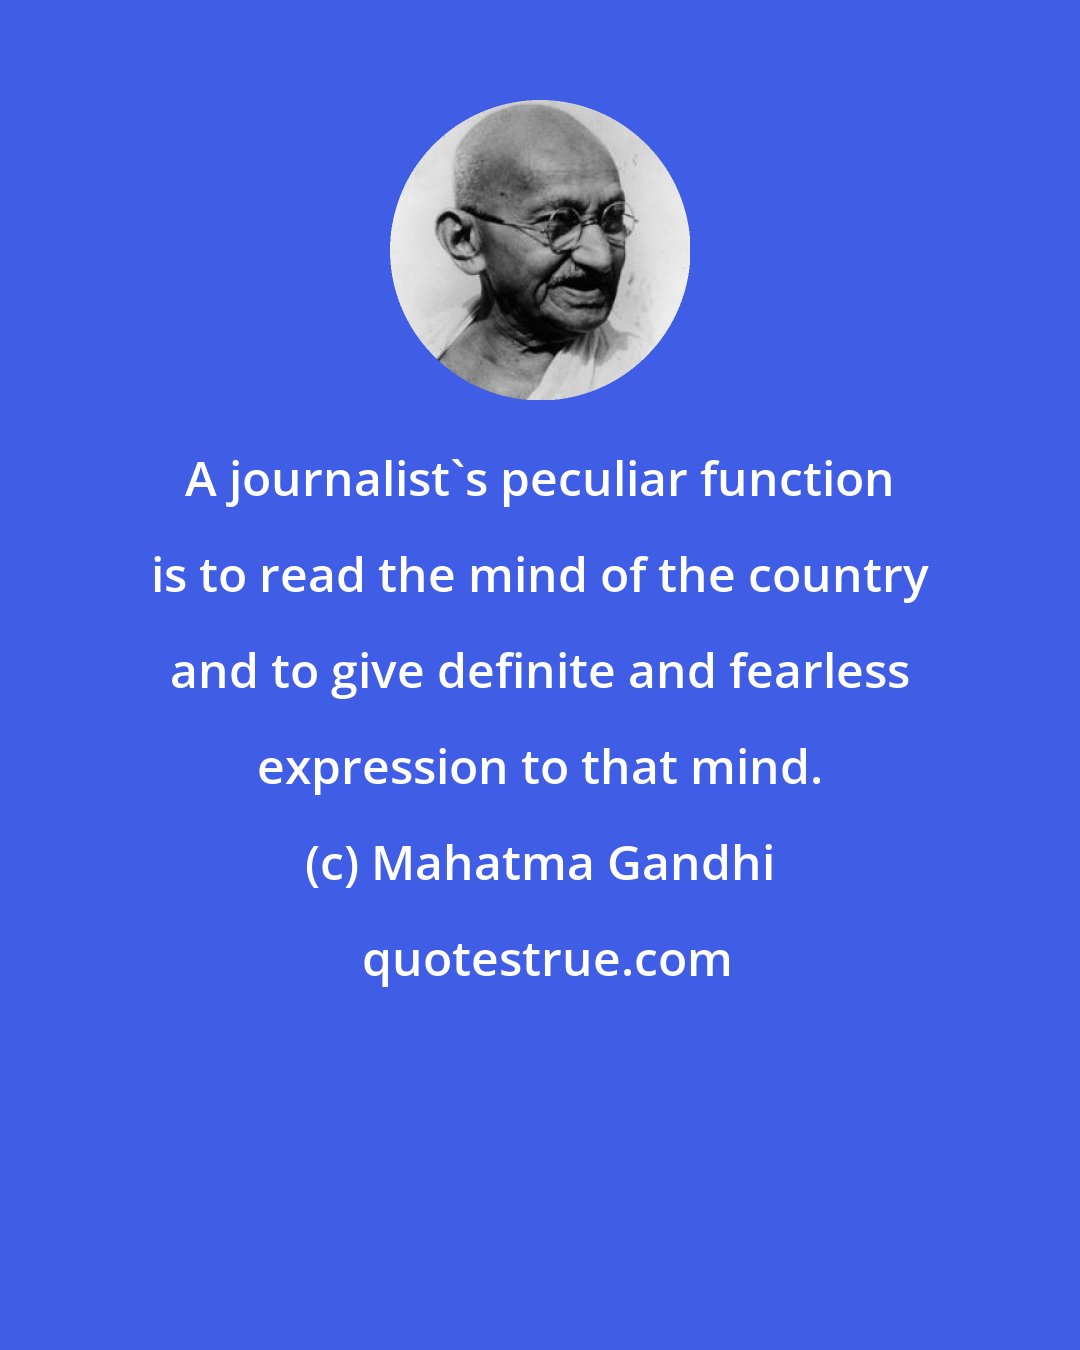 Mahatma Gandhi: A journalist's peculiar function is to read the mind of the country and to give definite and fearless expression to that mind.